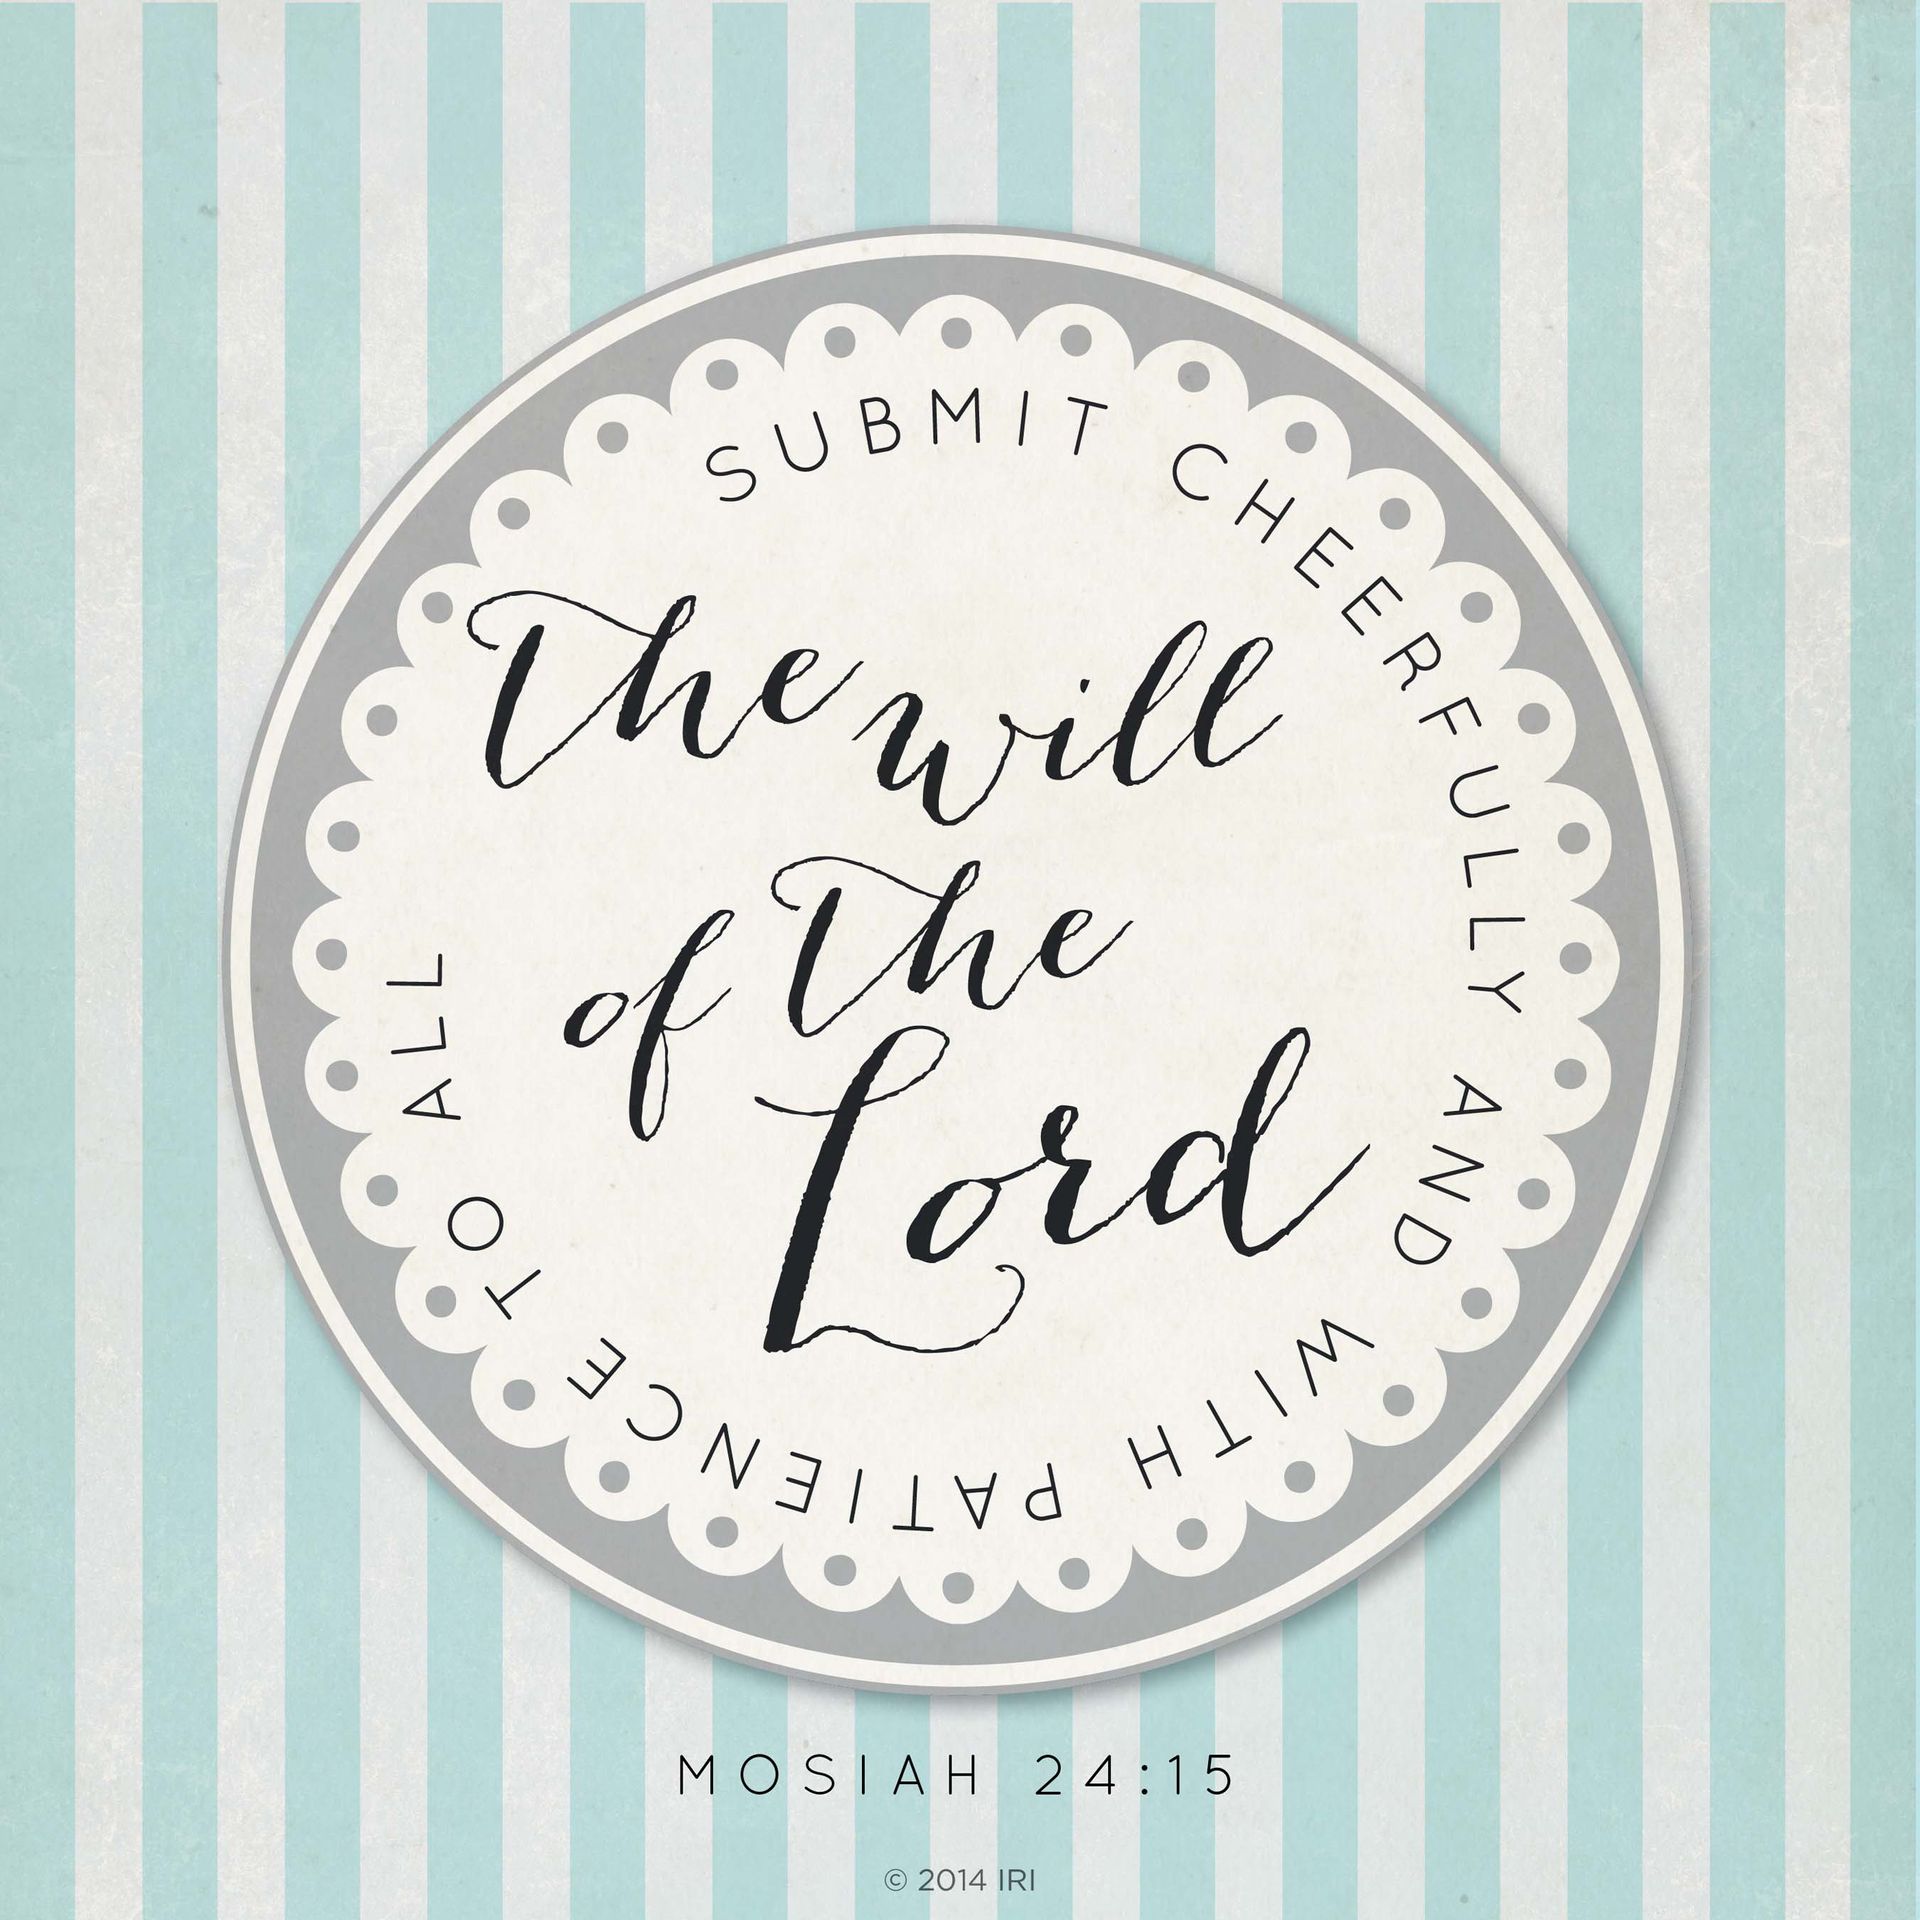 “Submit cheerfully and with patience to all the will of the Lord.”—Mosiah 24:15